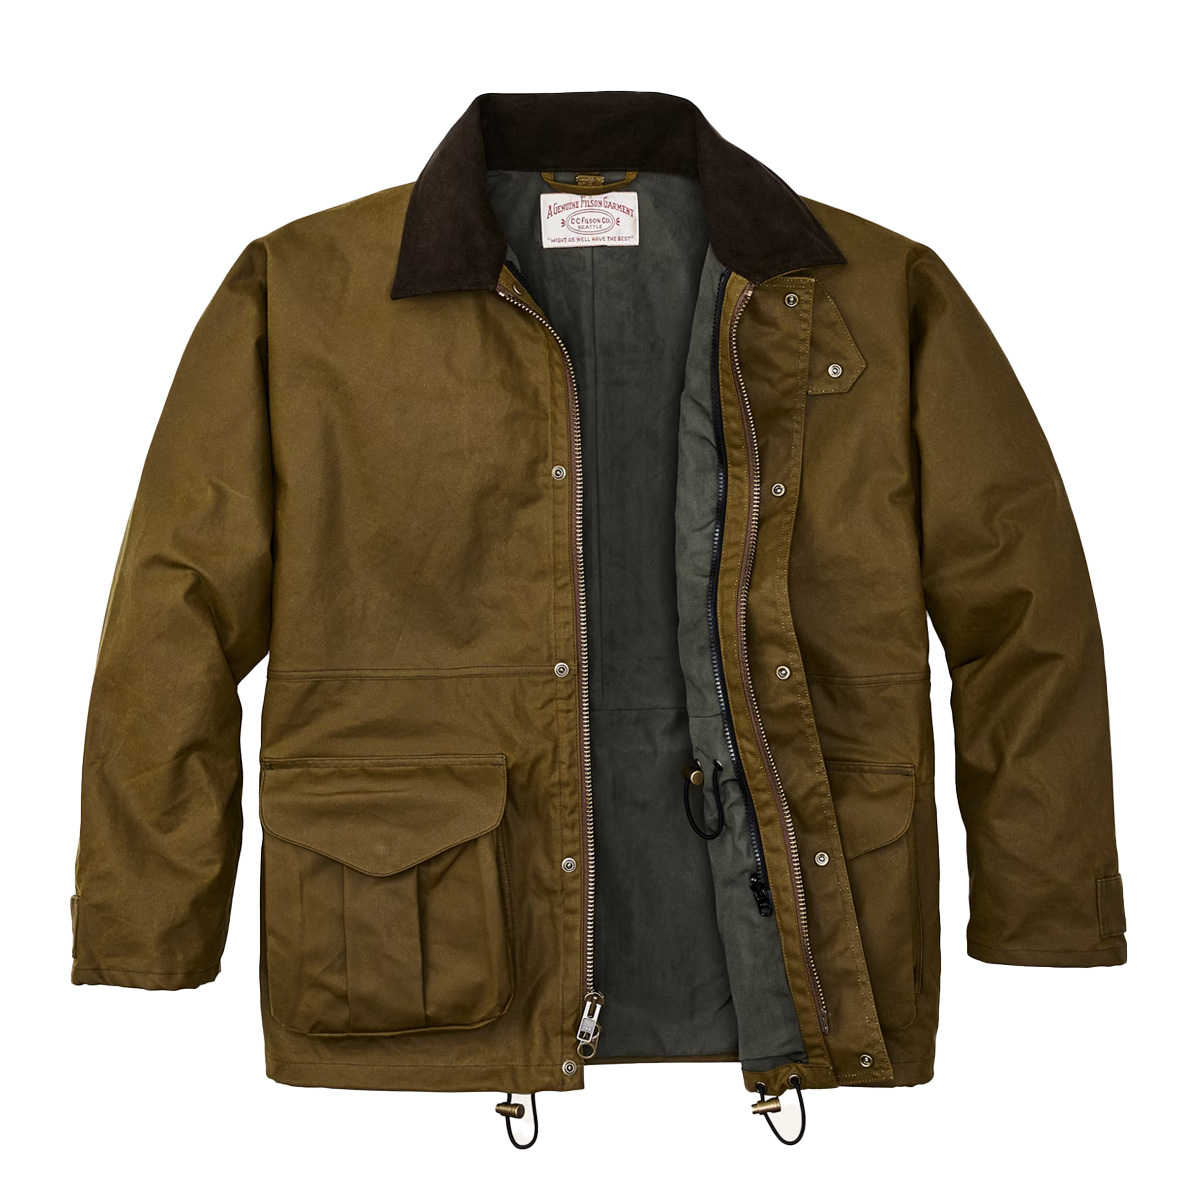 Filson Foul Weather Jacket Dark Tan, the ideal jacket for wet weather